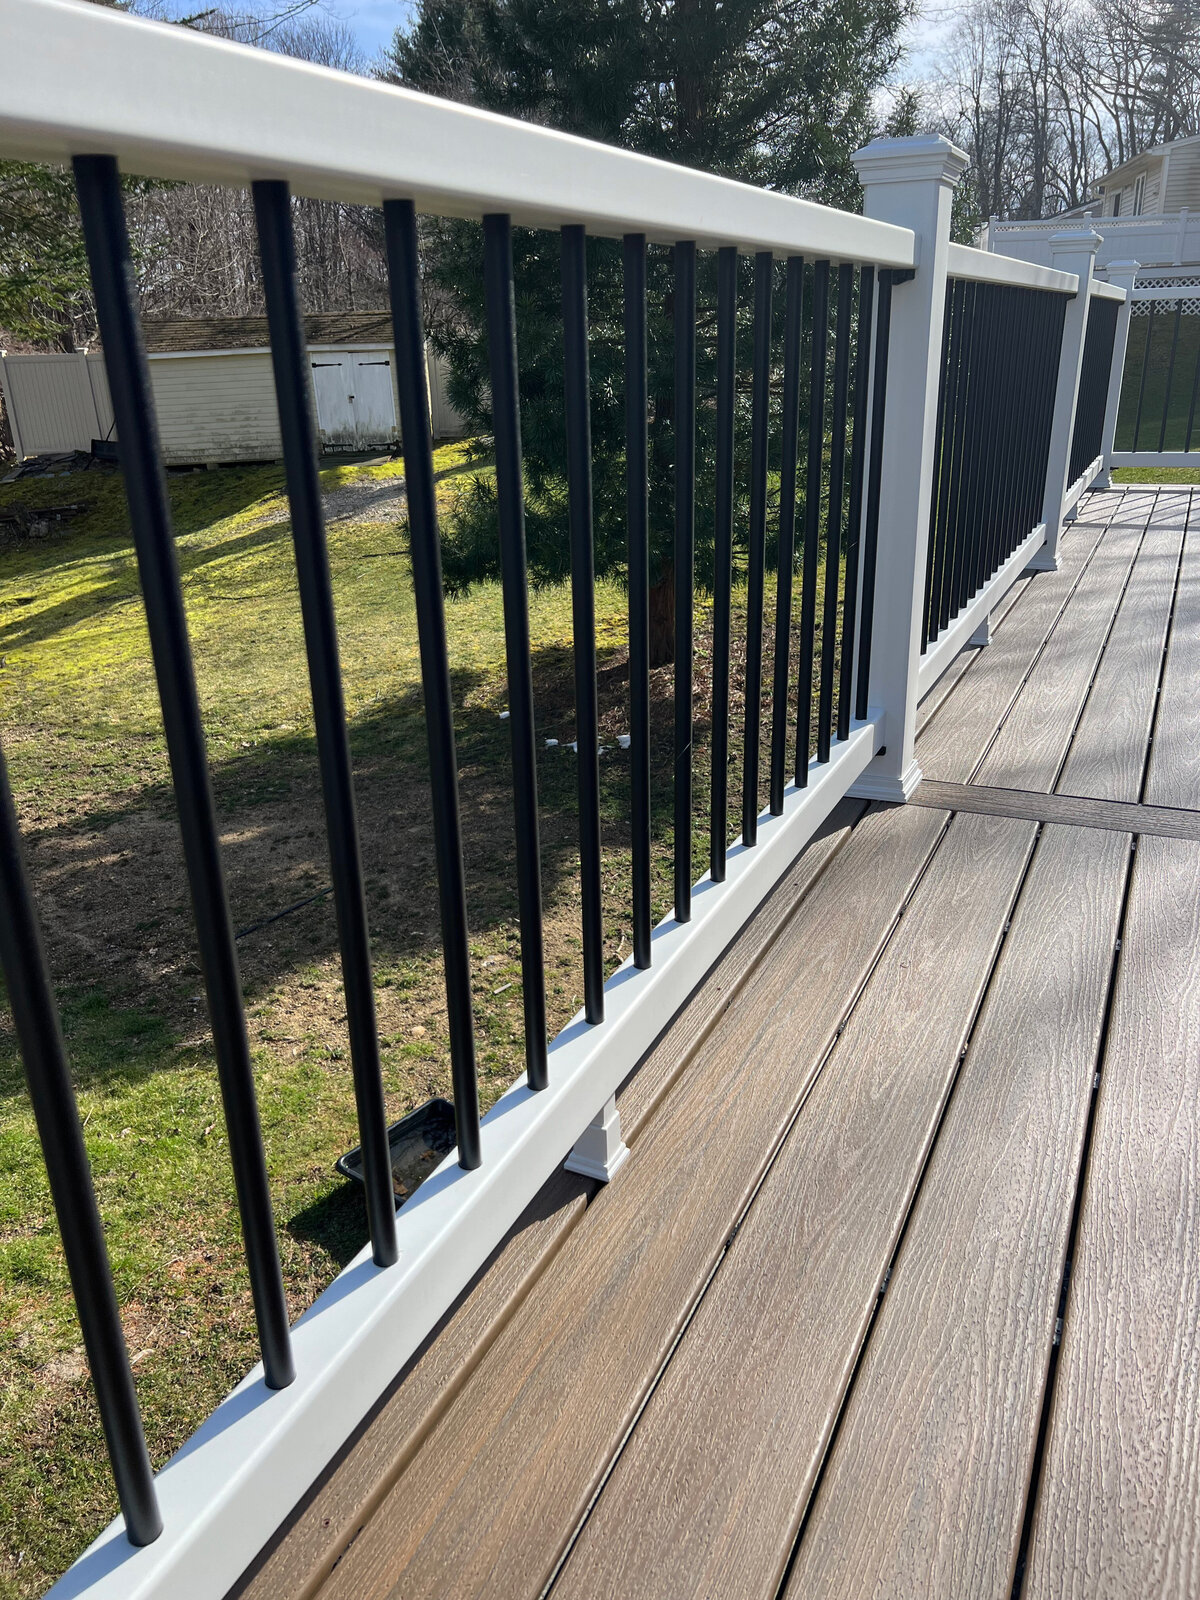 Details of a white PVC deck railing with black support bars